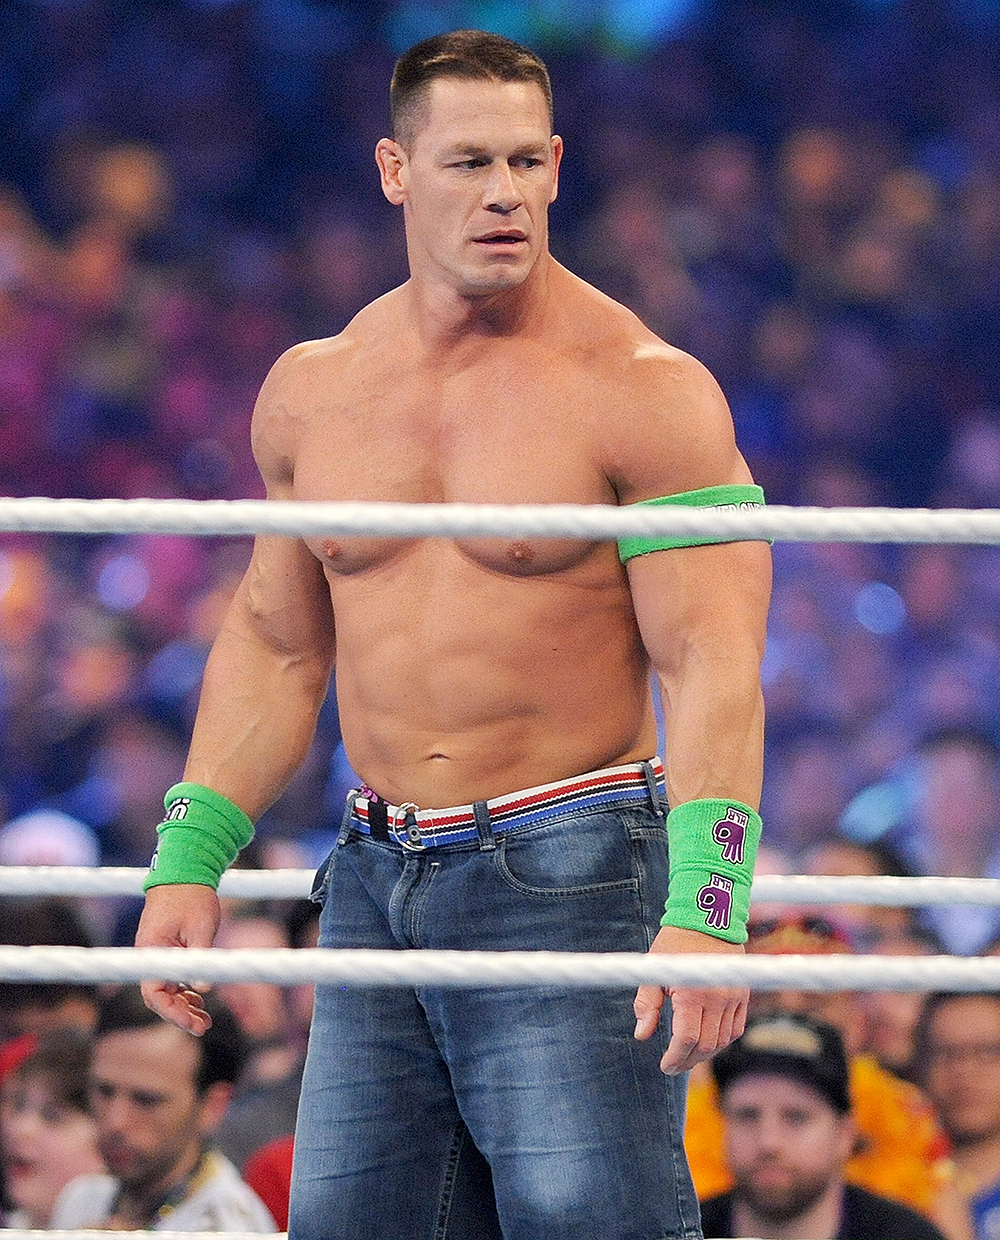 John Cena PICS of the Wrestling and Movie Star picture pic